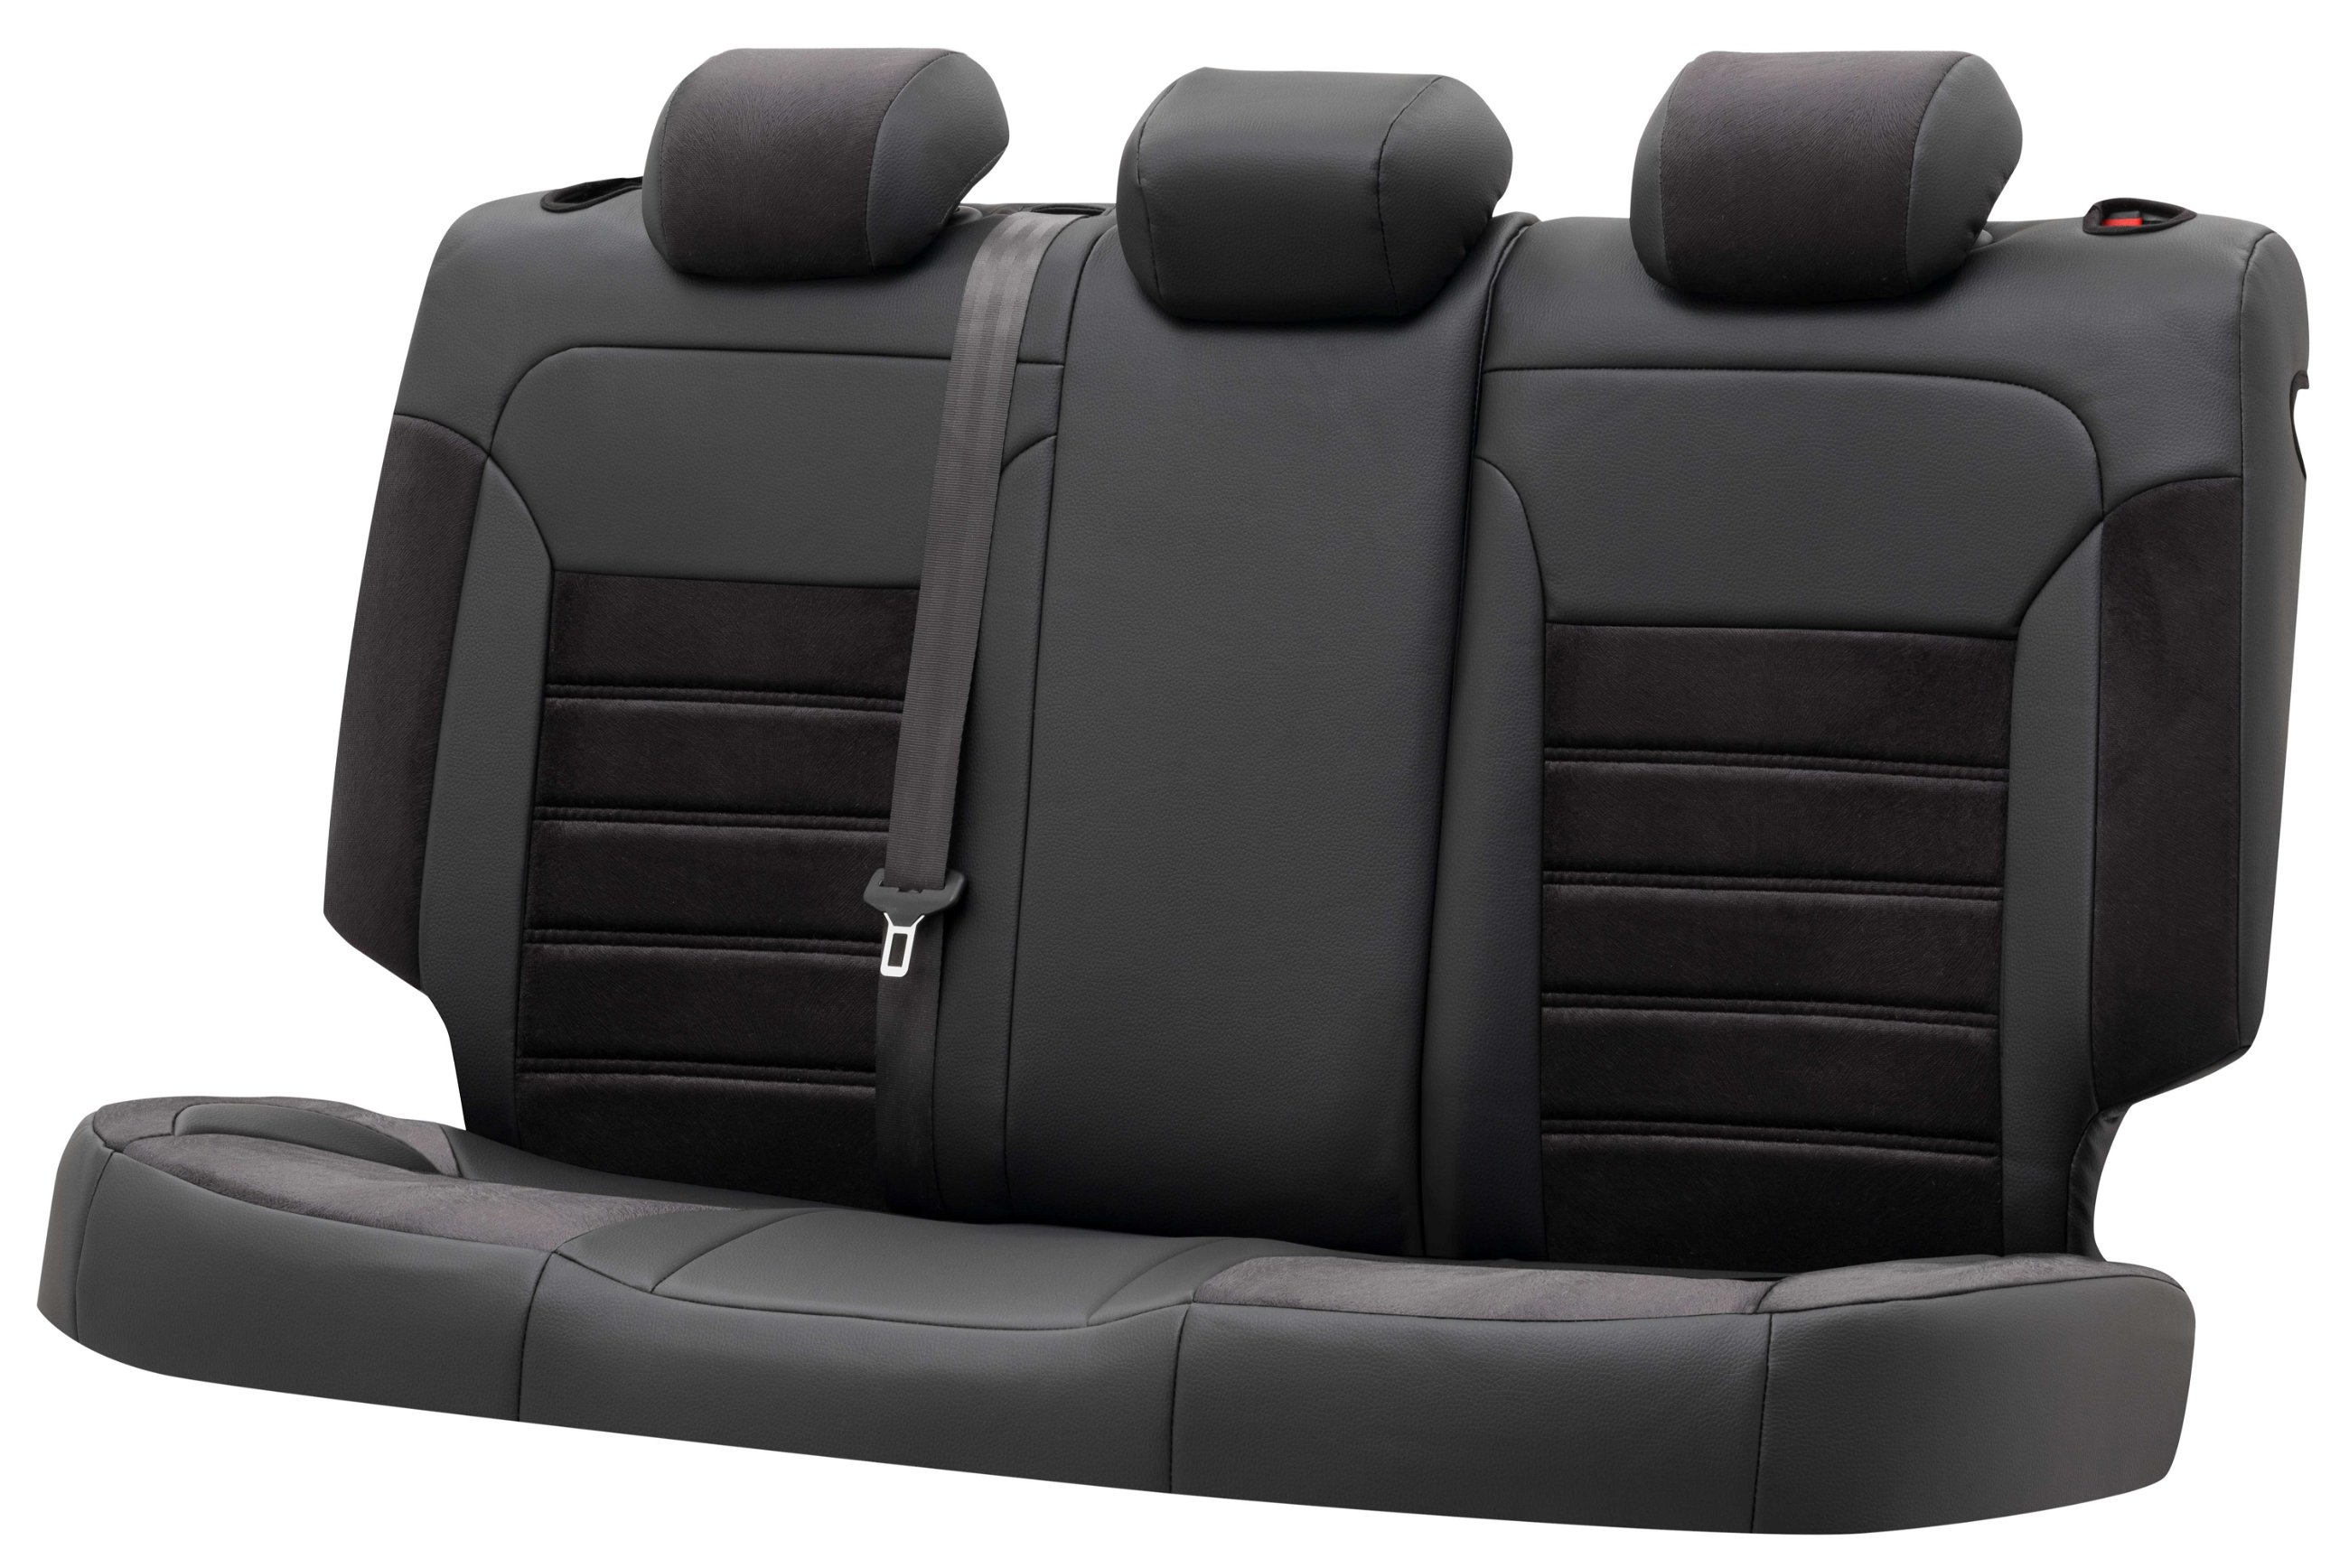 Seat Cover Bari for Mercedes-Benz C-Class (W204) 01/2007-01/2015, 1 rear seat cover for normal seats